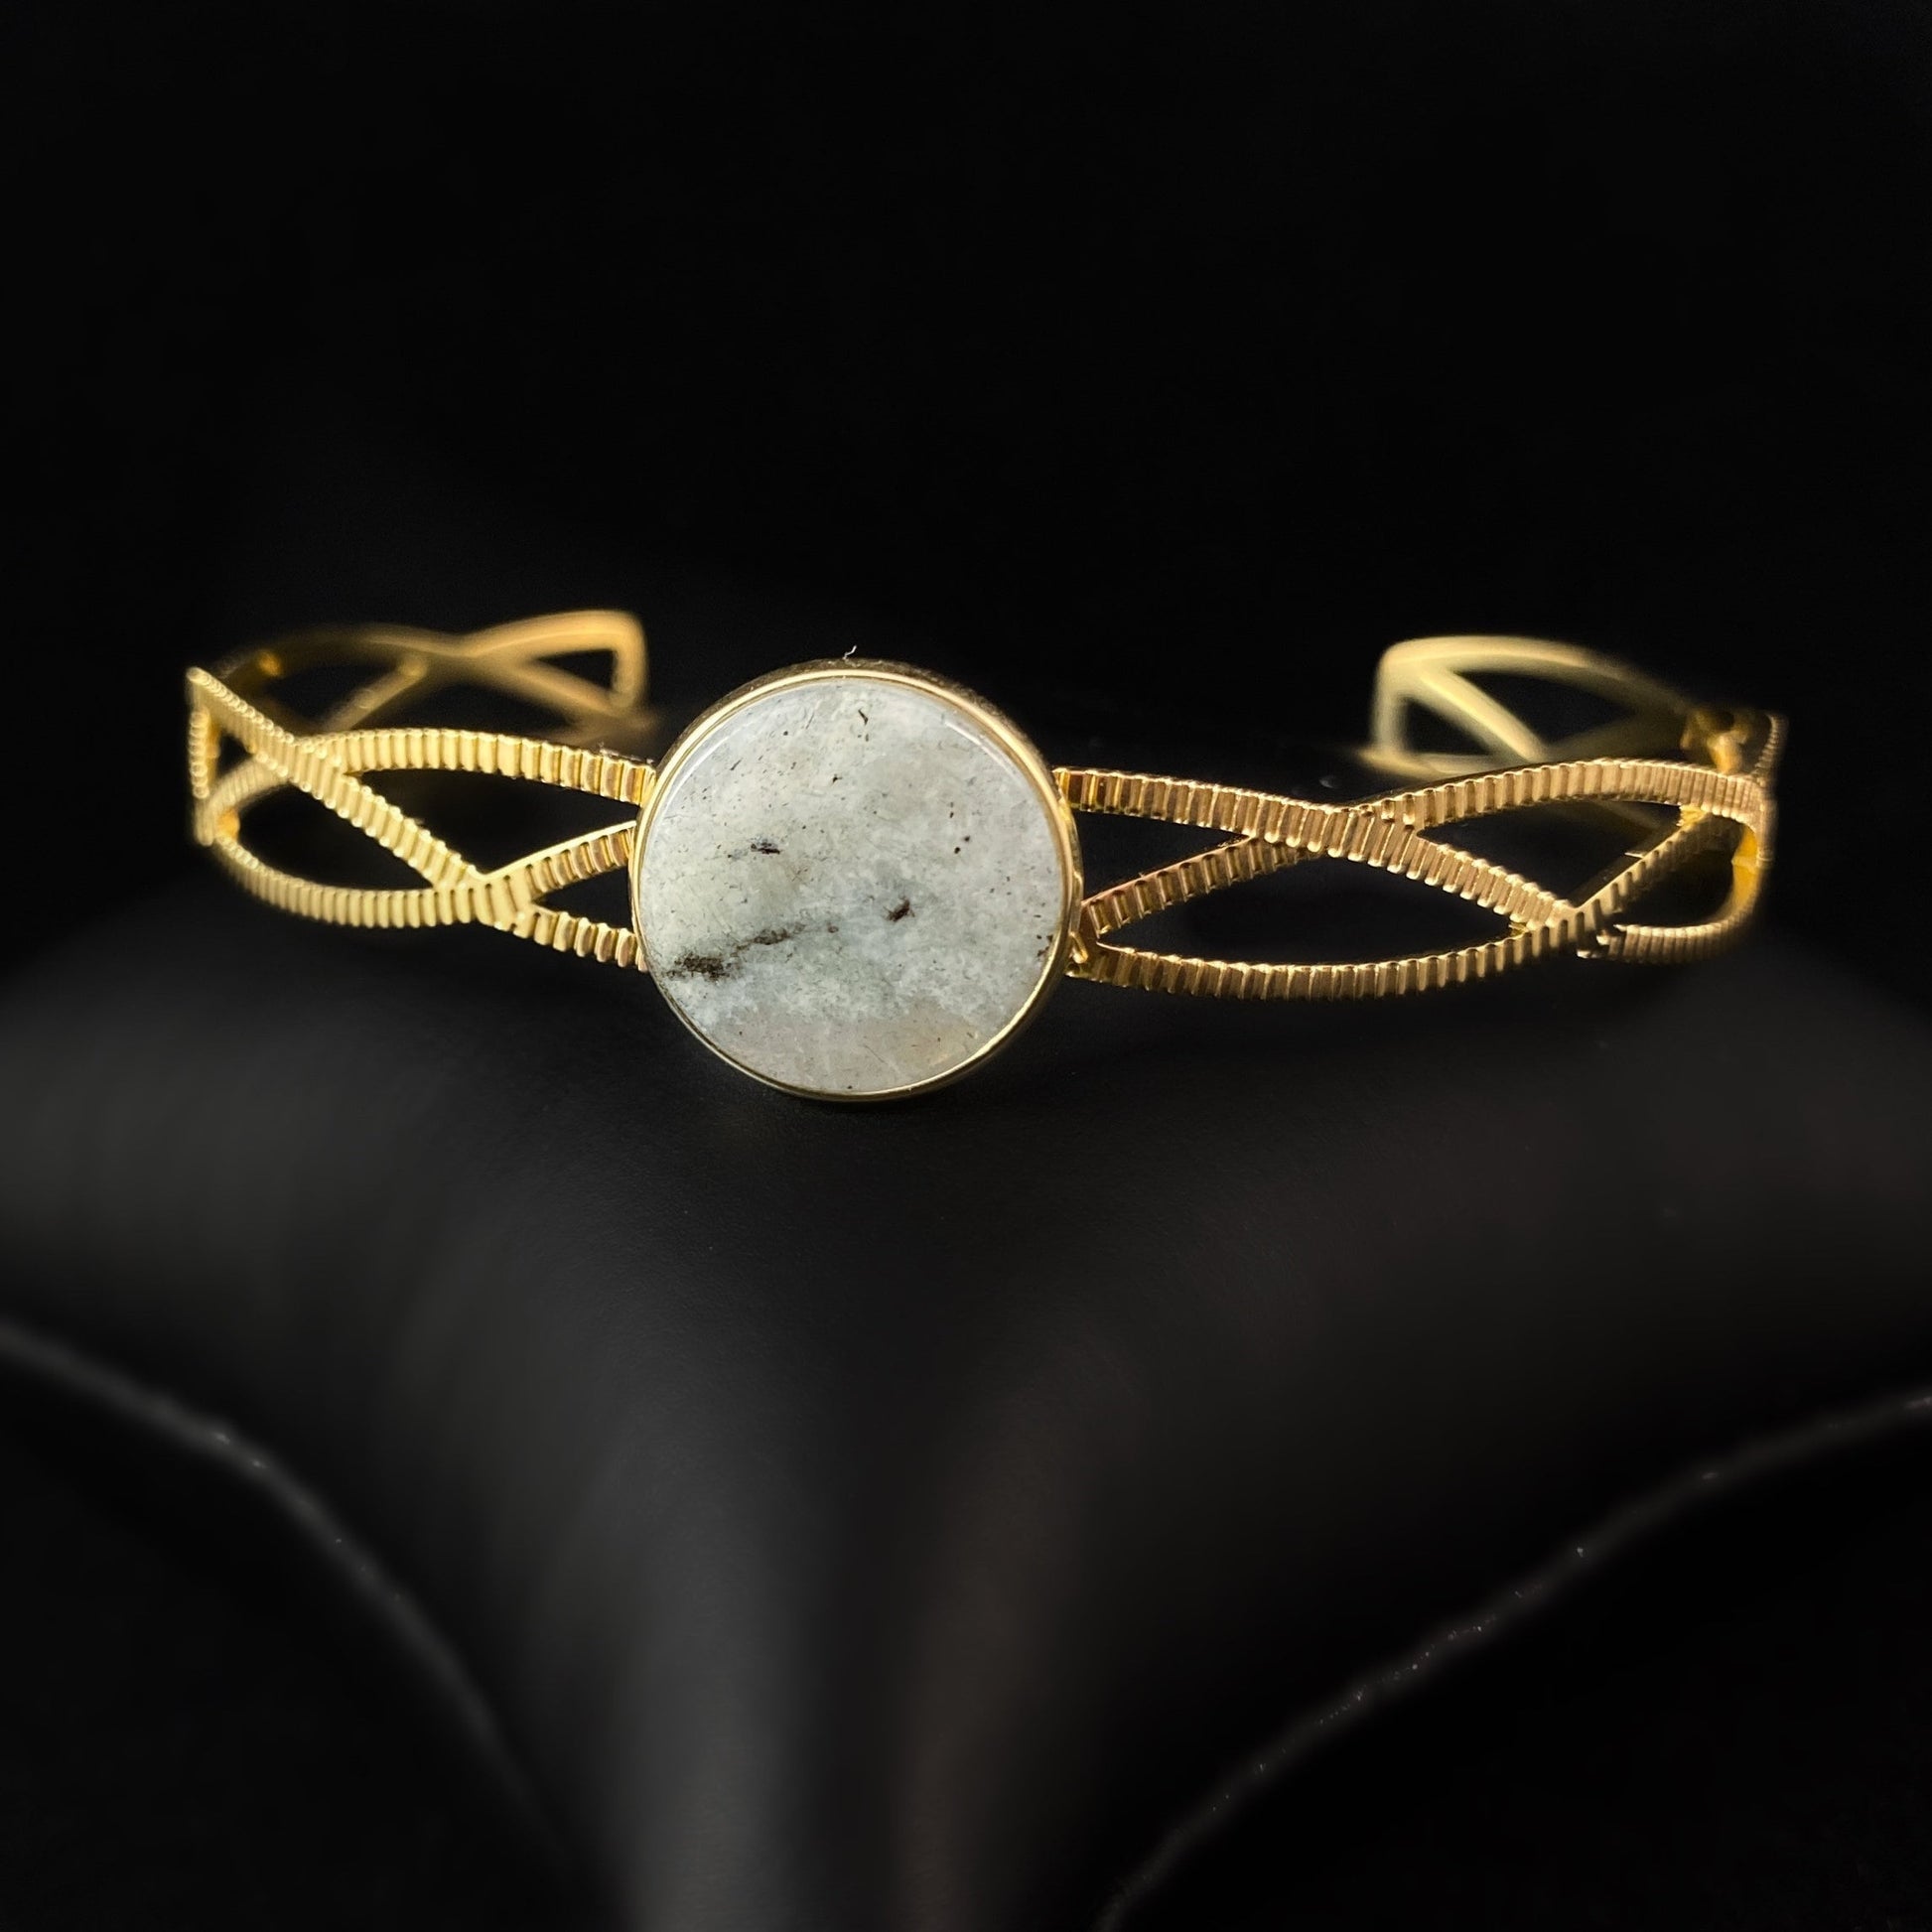 Pastel Green Natural Stone Braided Cuff Bracelet with Intricate Gold Bands and Circular Stone